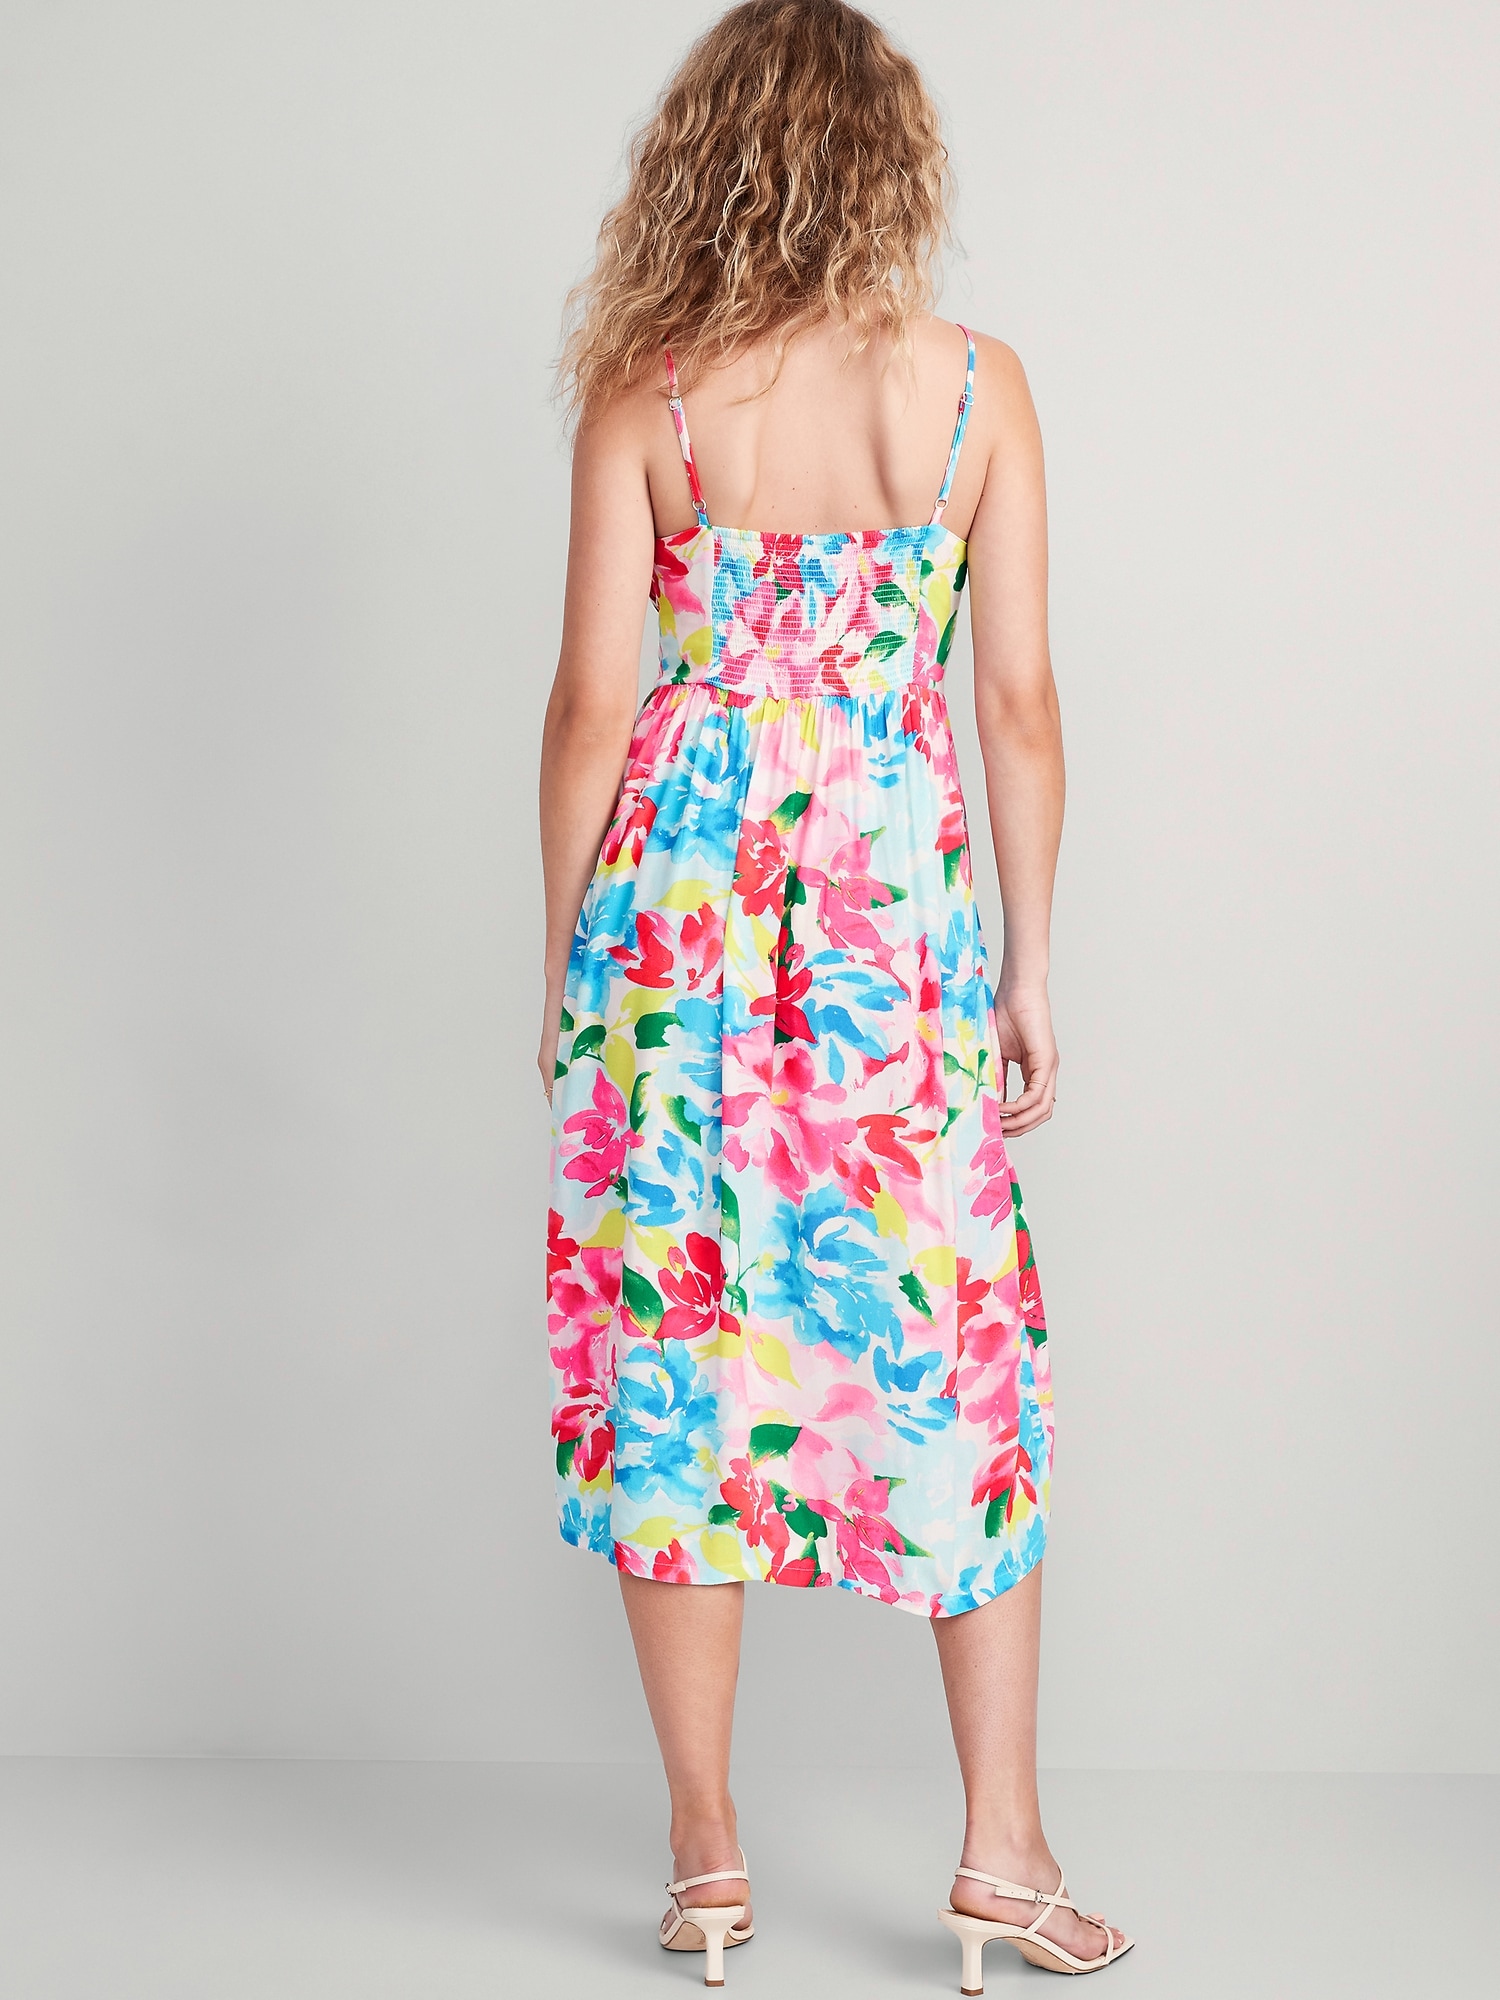  UIRPK CamiBloom - Floral Printed Camisole Dress Womens